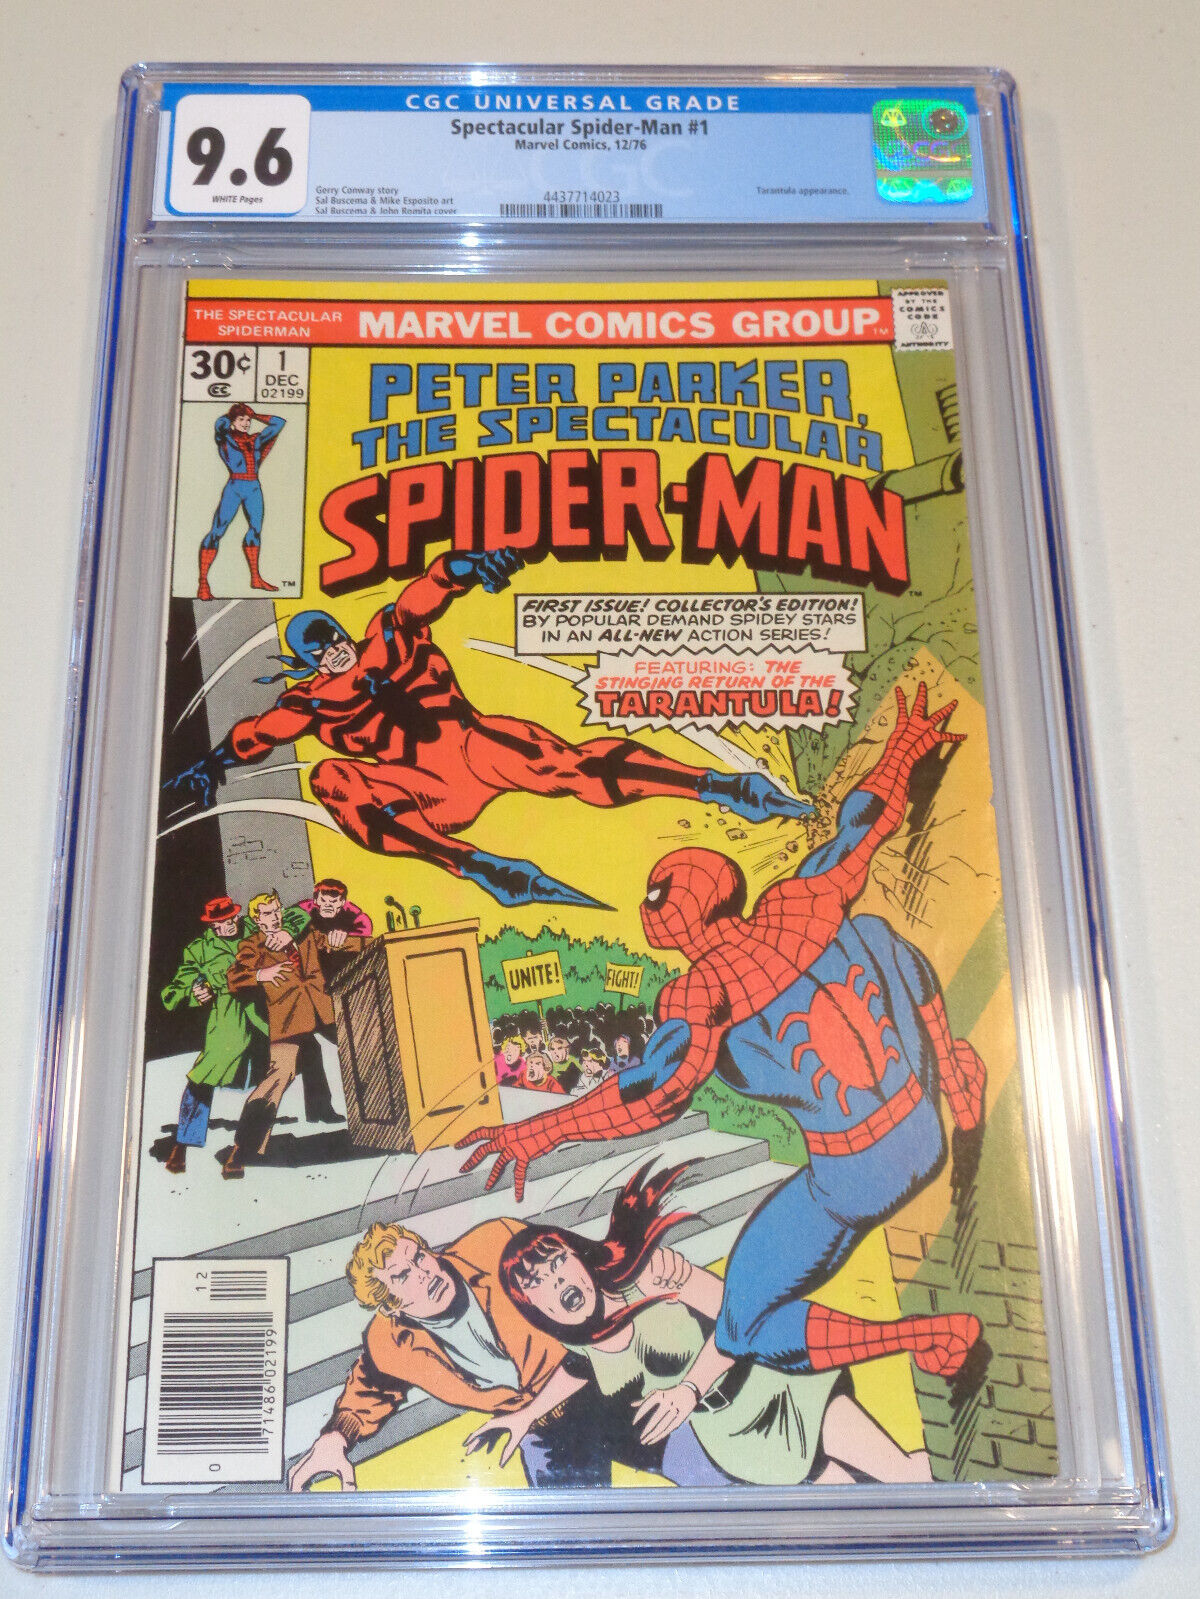 SPECTACULAR SPIDER-MAN #1 - CGC 9.6 NM+ (1976 Marvel ; Issue #1 ; White Pages)